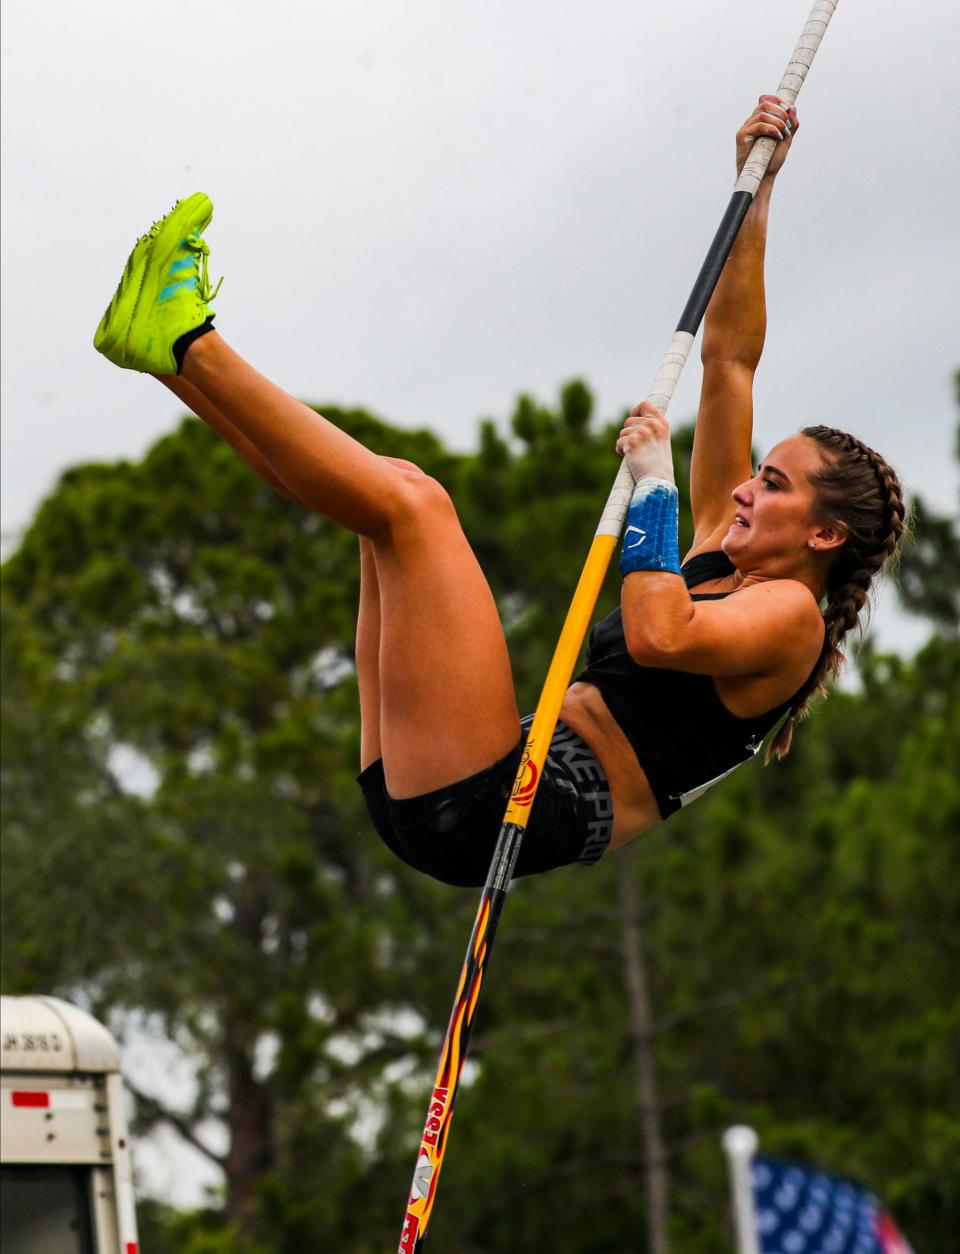 "Pole Vault in the Plaza" competition was held at Mercato in Naples, FL, Saturday, June 25, 2022. A mix of beginners and amateurs competed early in the day. It then progressed throughout the day with the highest level of both female and male pole vaulters competing. 